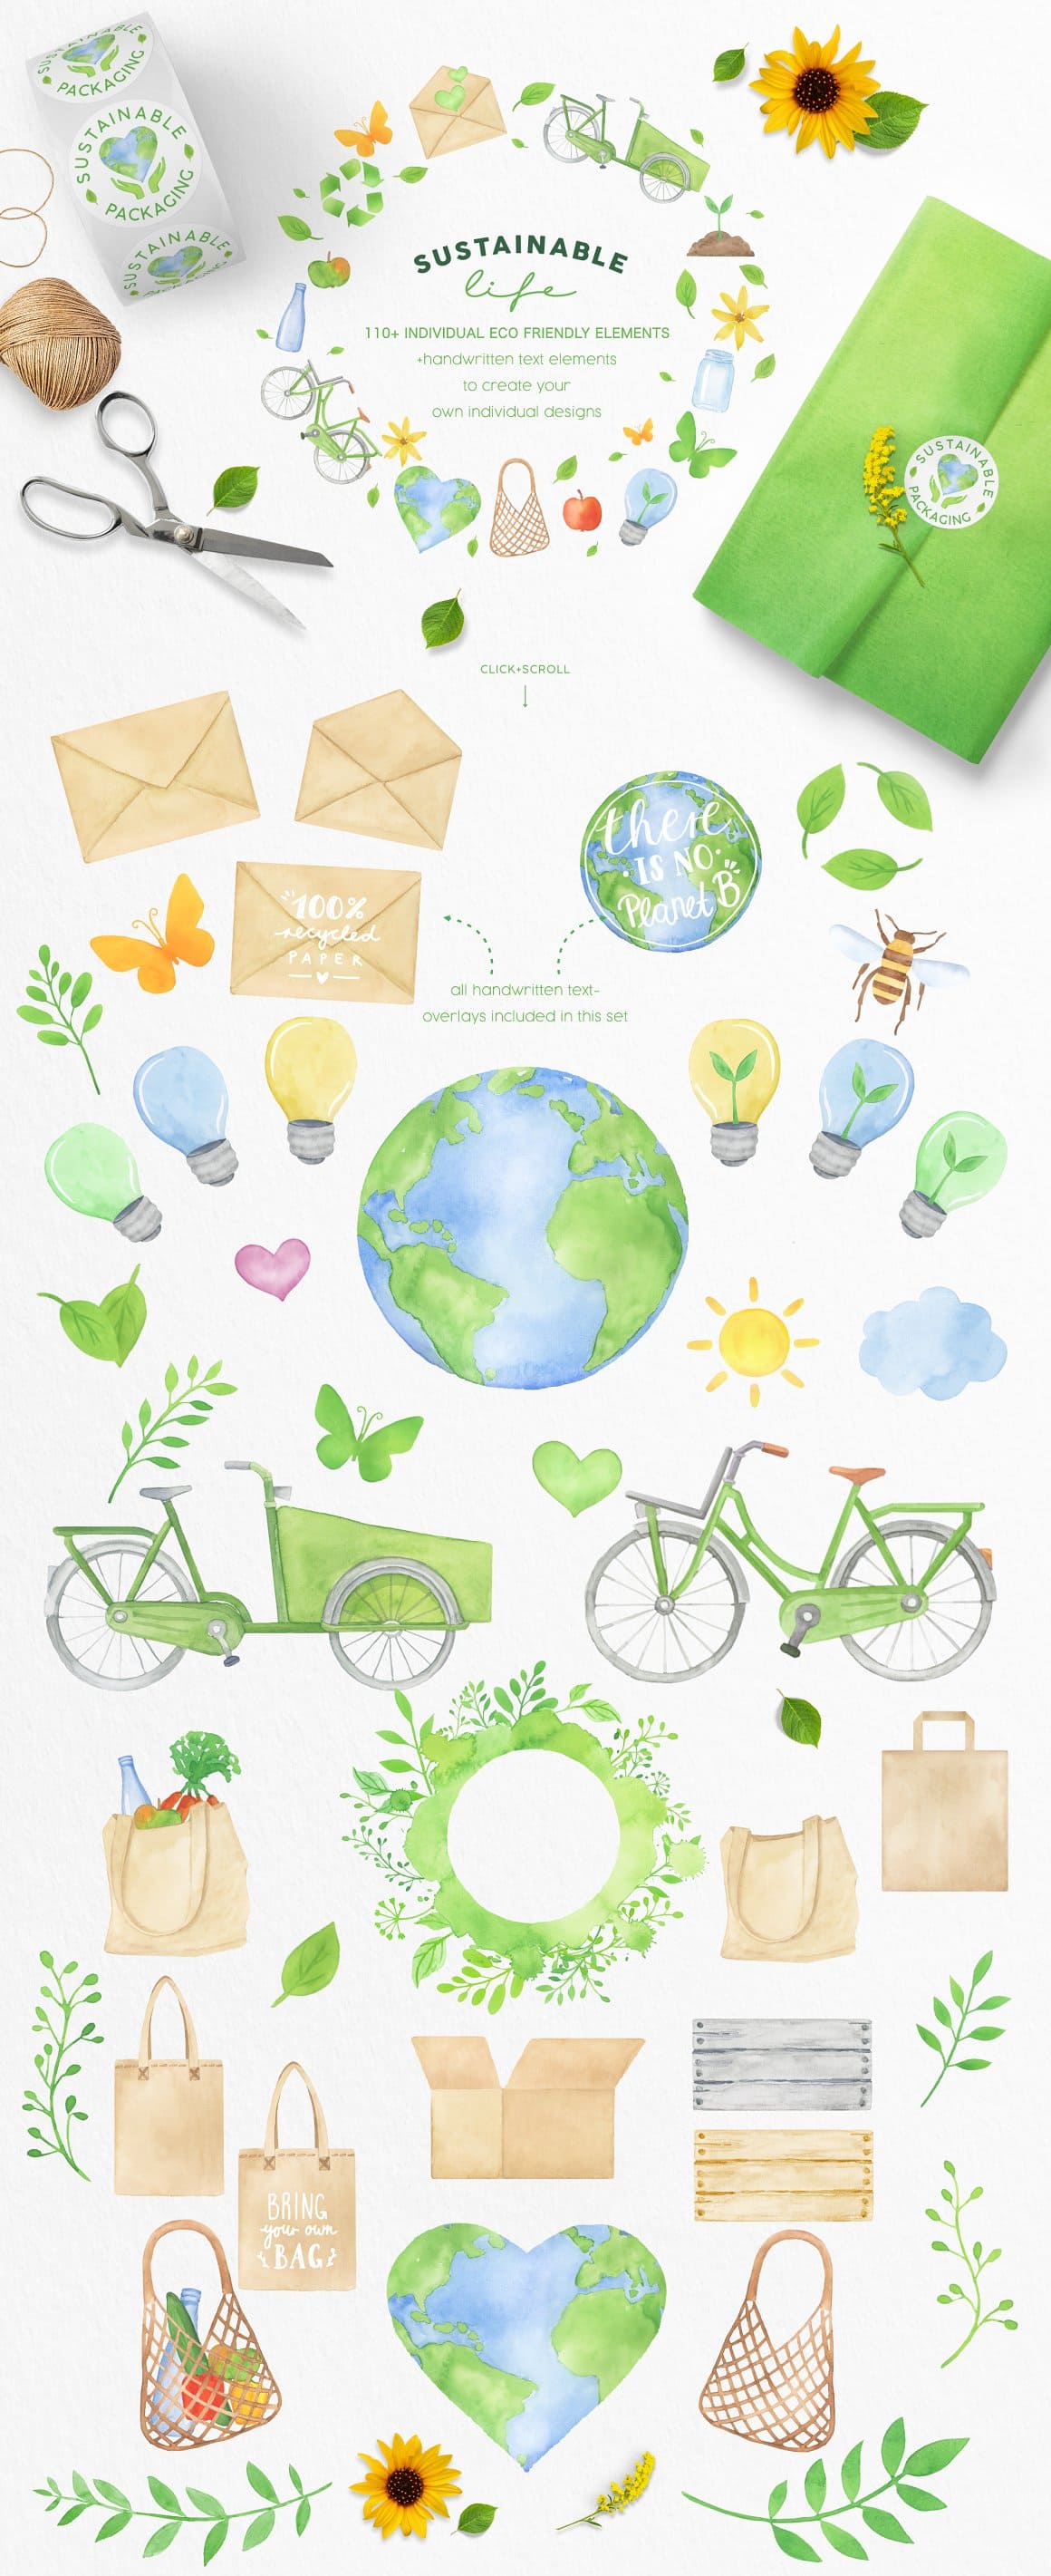 Image of bicycle, fabric bags, cardboard boxes for ecological consumption of Earth's resources.